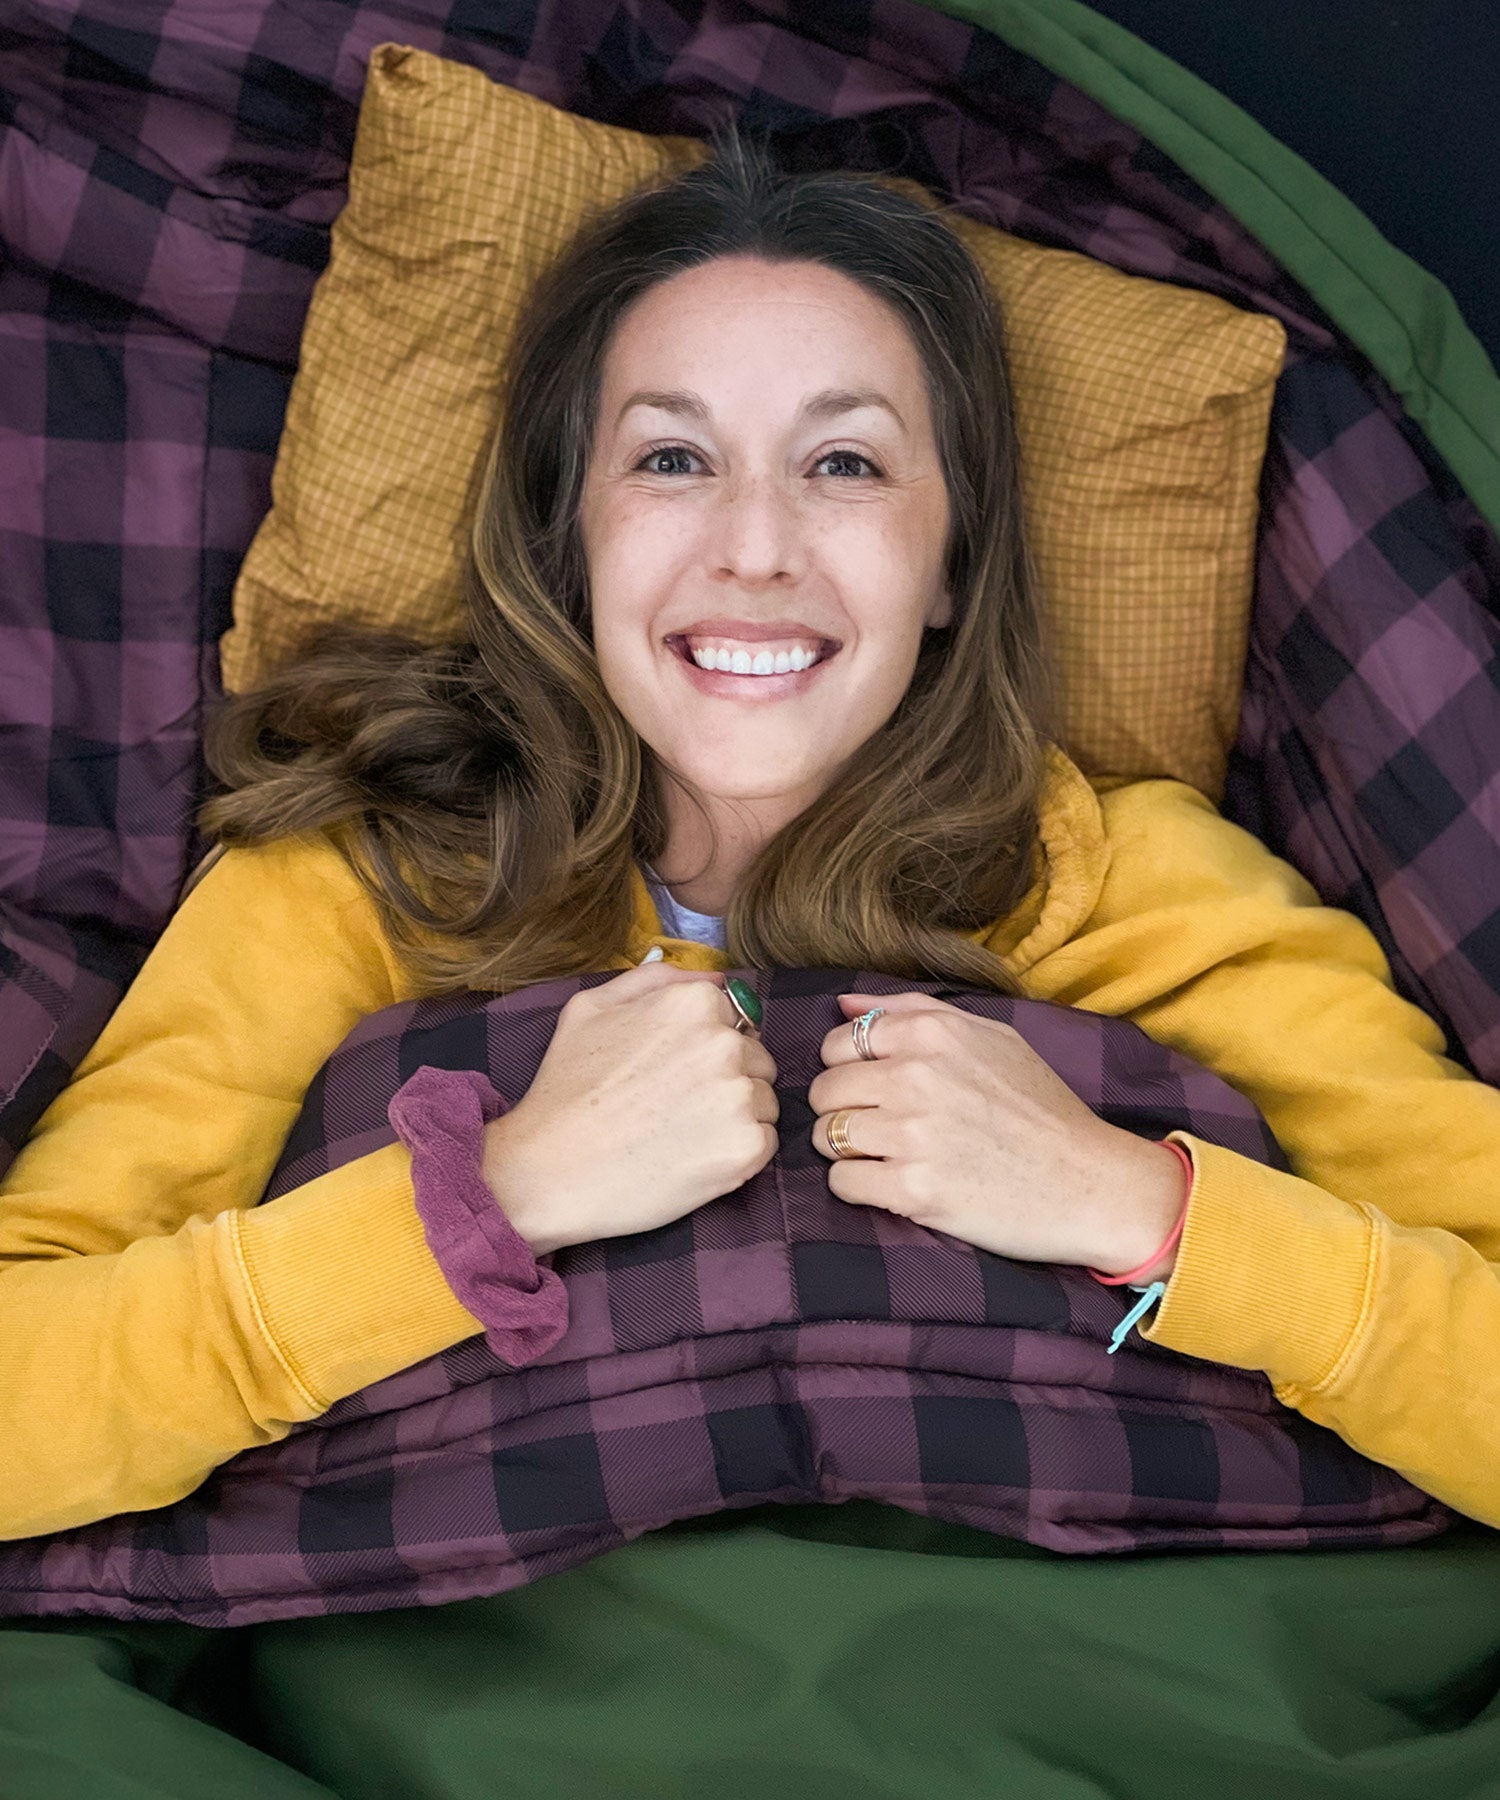 Image shows a woman smiling while snuggled in a green TETON Sports Bridger Canvas Sleeping Bag.